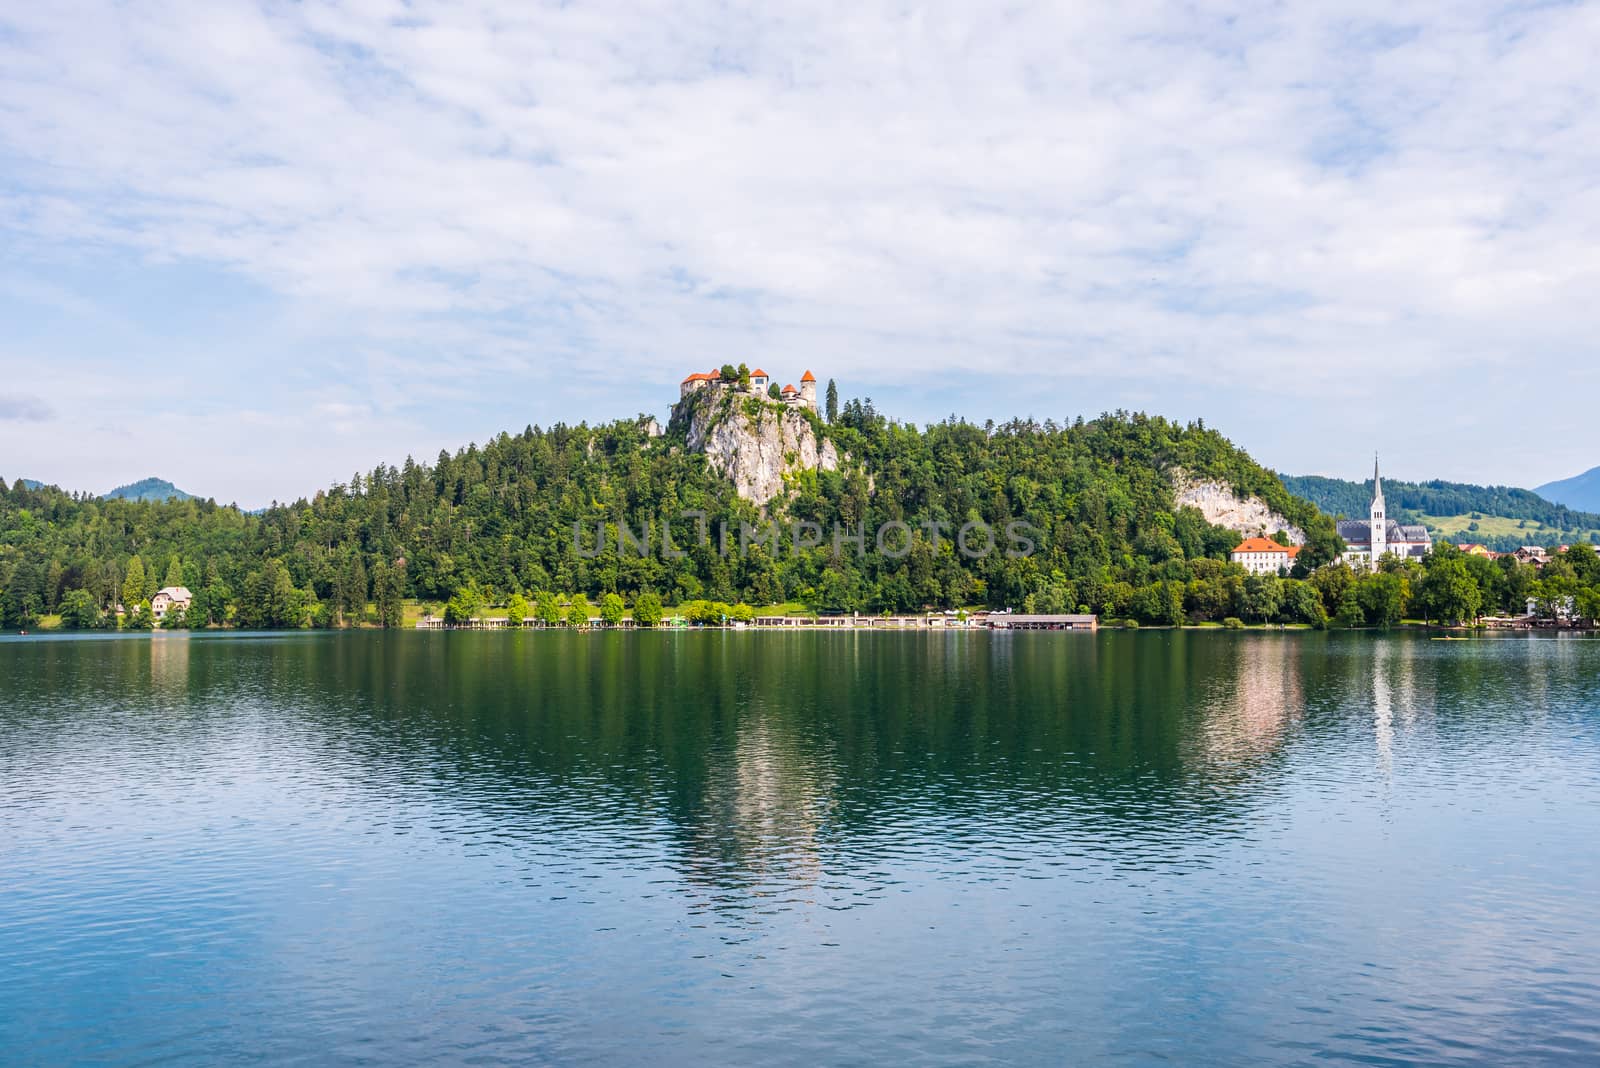 Bled Castle on a Rock at Bled Lake in Slovenia Reflected on Water Surface with Cloudy Sky